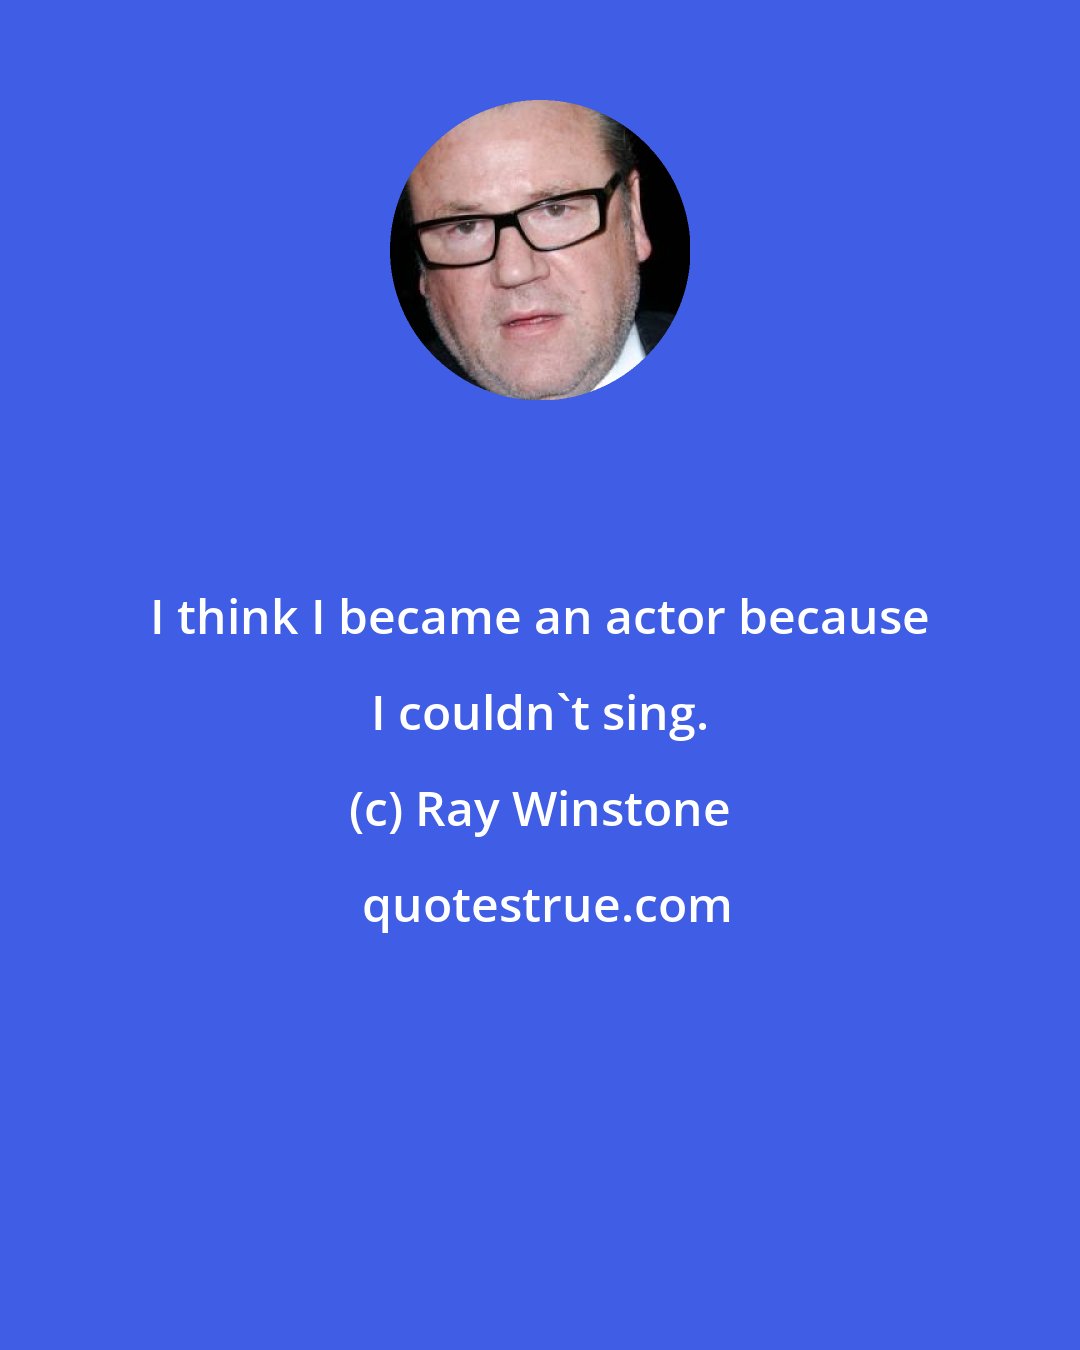 Ray Winstone: I think I became an actor because I couldn't sing.